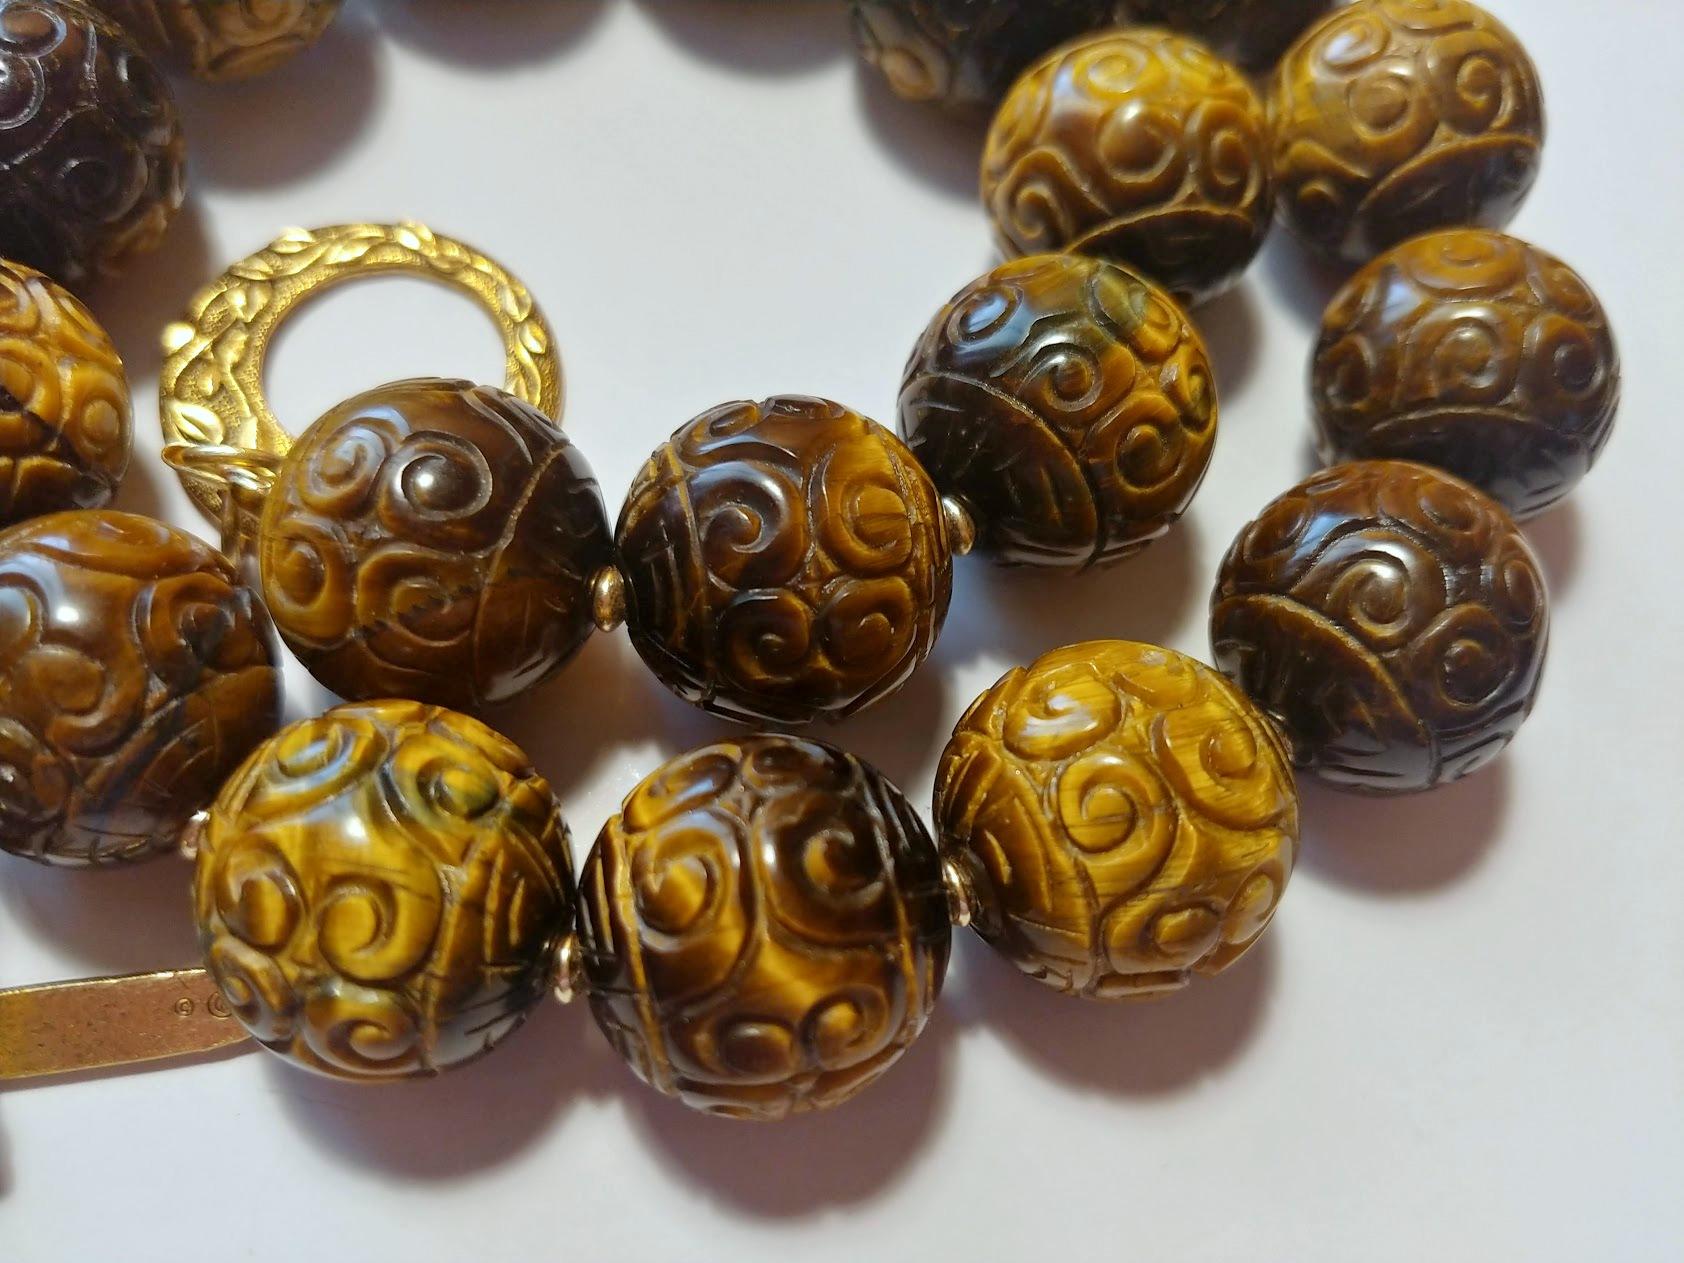 The length of the necklace is 23.5 inches (60 cm). The size of the carved round beads is 18 mm. The tiger's eye beads are old.
The tones of the beads are a wondrous golden brown, caramel gold, and silky—gorgeous warm shades.
The color is authentic